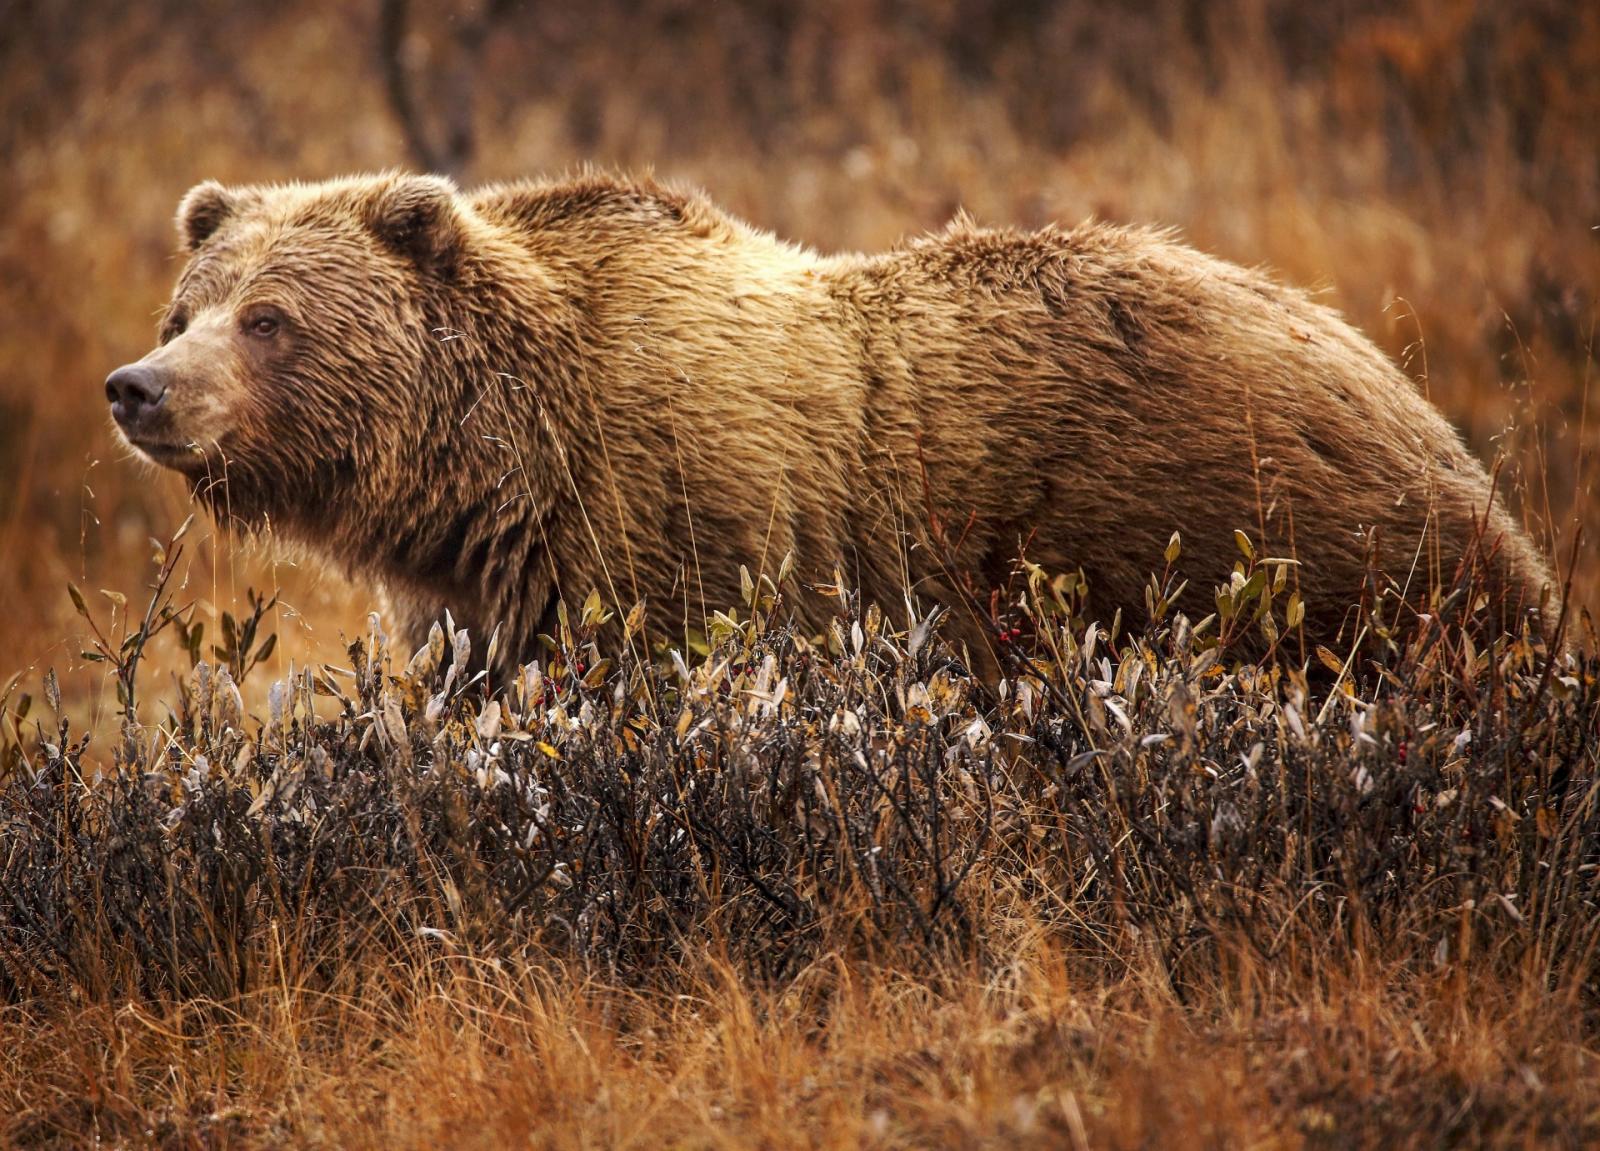 Passing This Animal Kingdom Quiz Is the Only Proof You Need to Show You’re the Smart Friend Grizzlybearjeanbeaufort